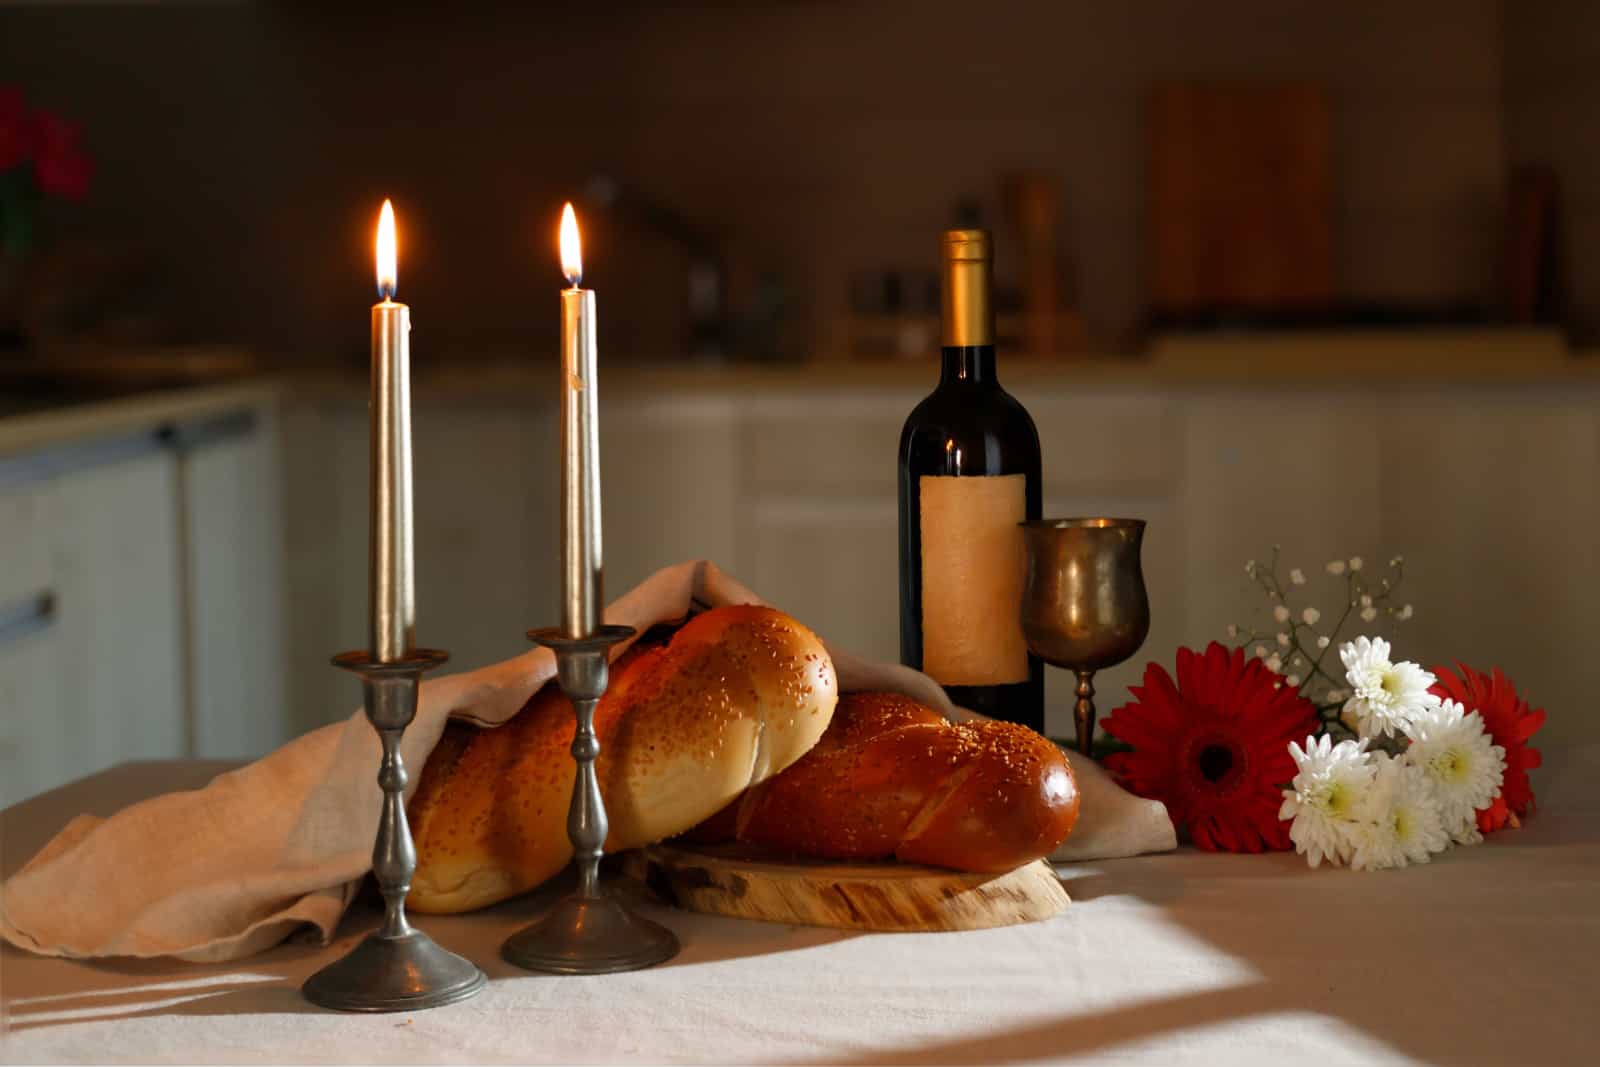 Challah bread covered with a special napkin, shabbat wine on the kitchen table. Traditional Jewish Shabbat ritual.